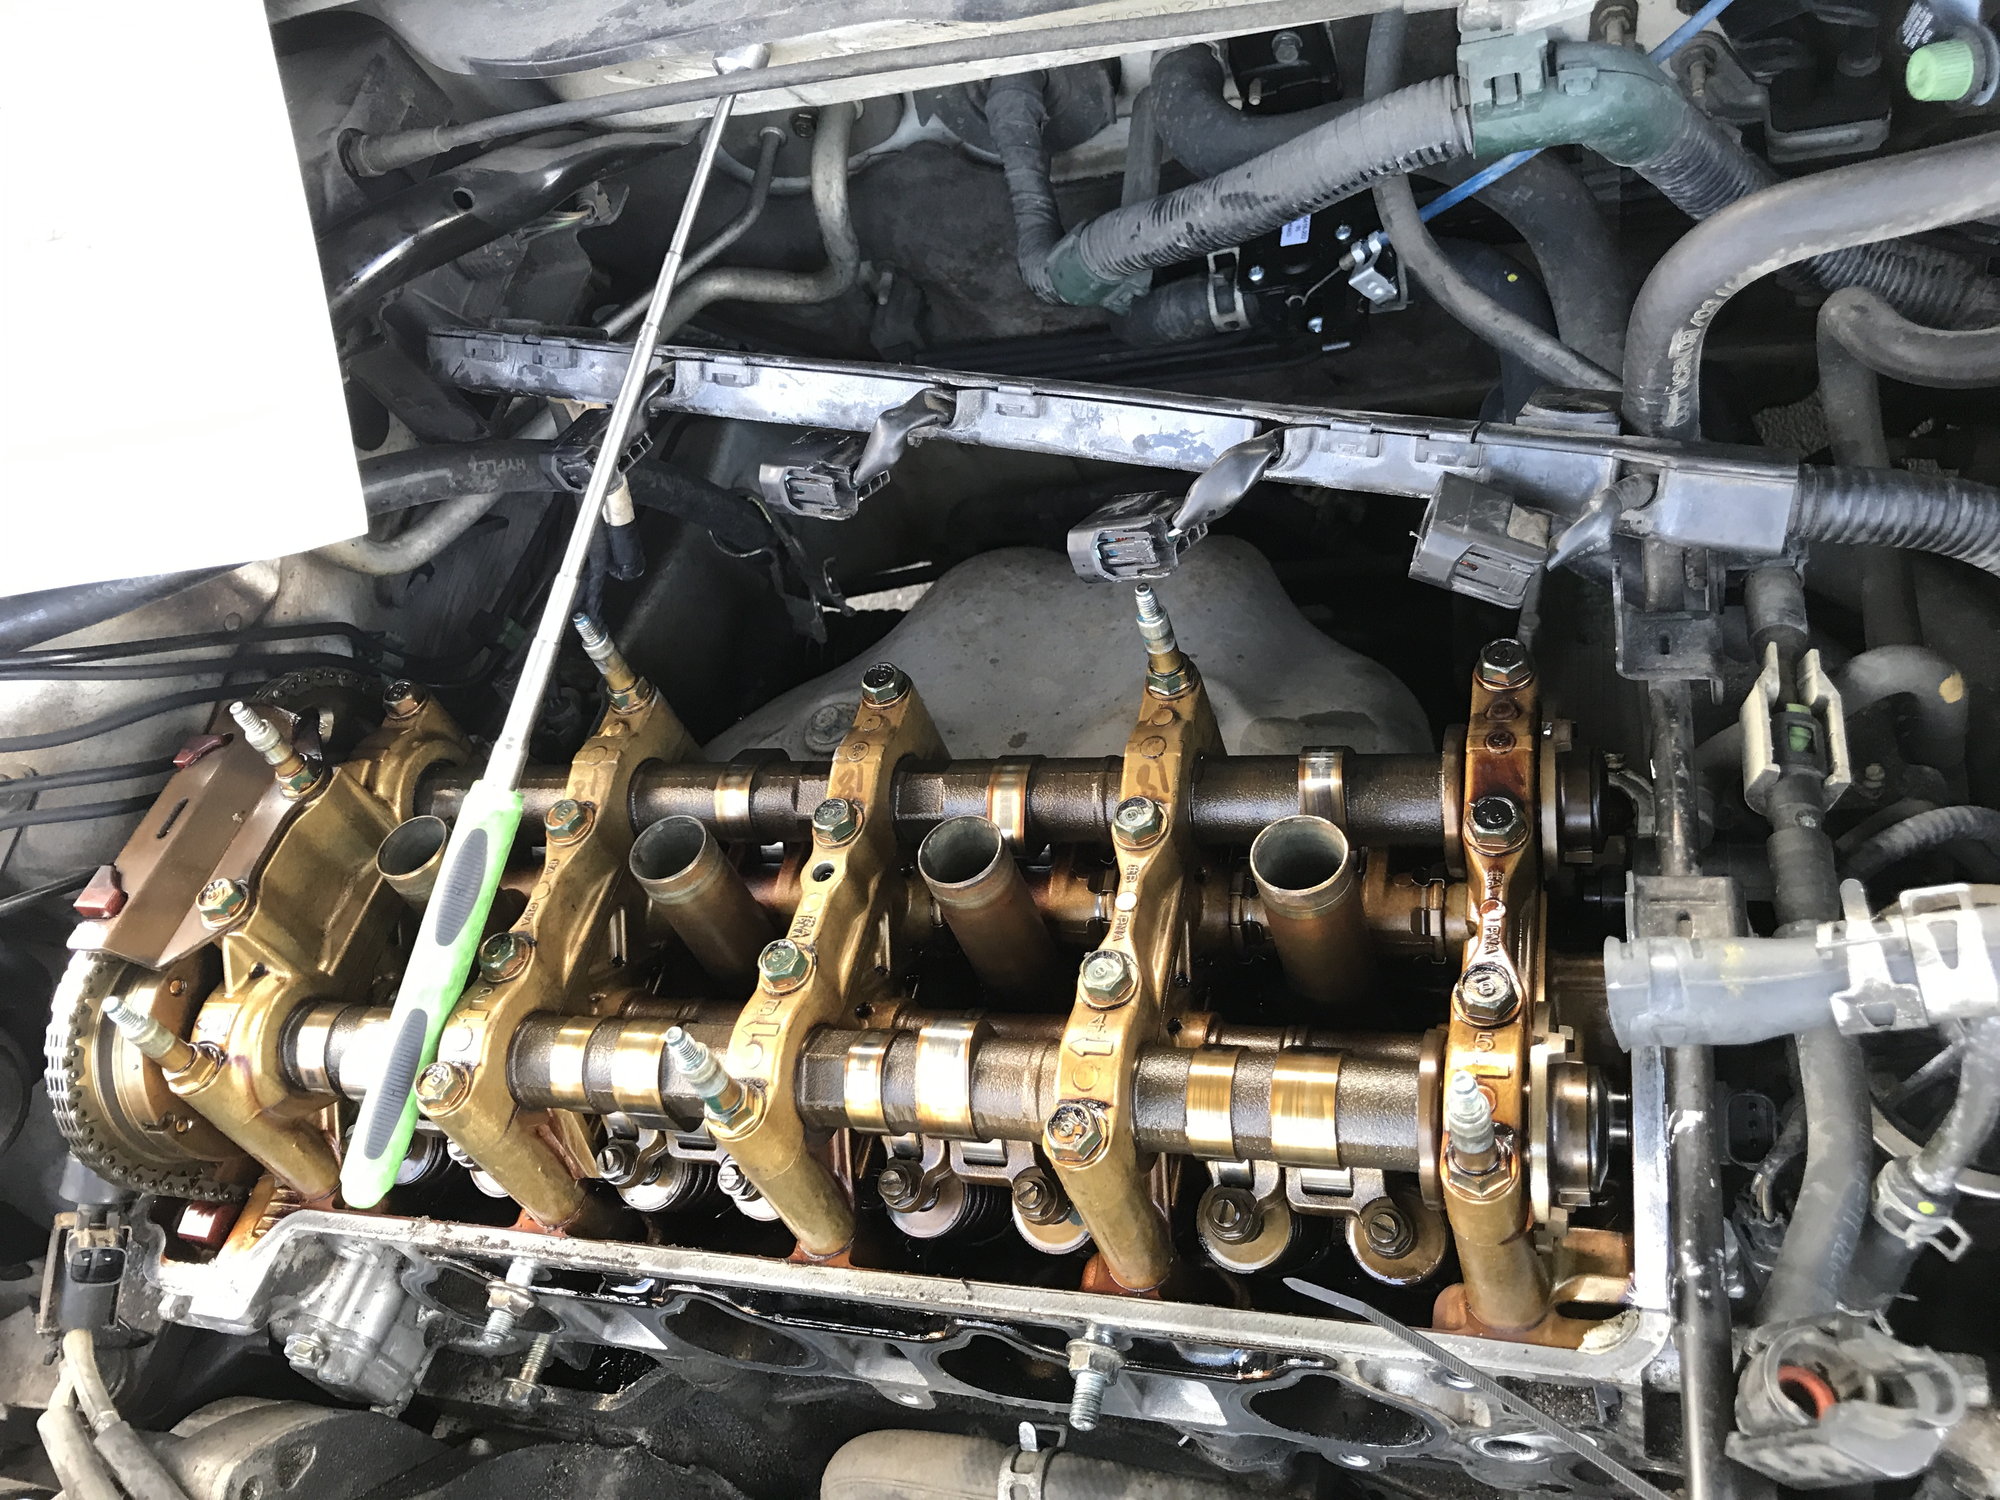 Head gasket, valve cover replacement. 2004 Honda Accord 4 cylinder